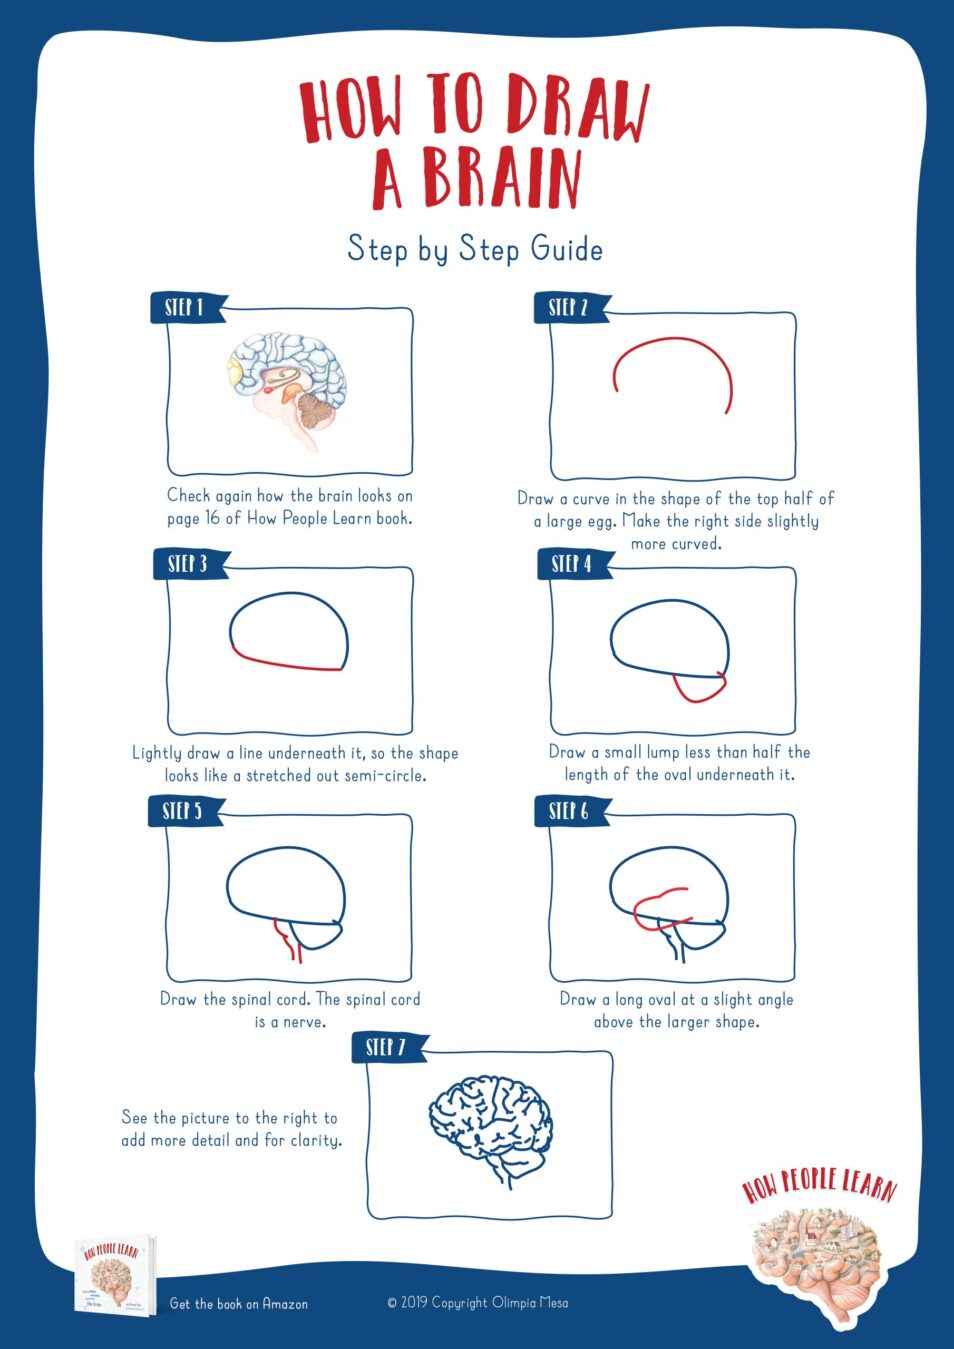 How to draw a brain